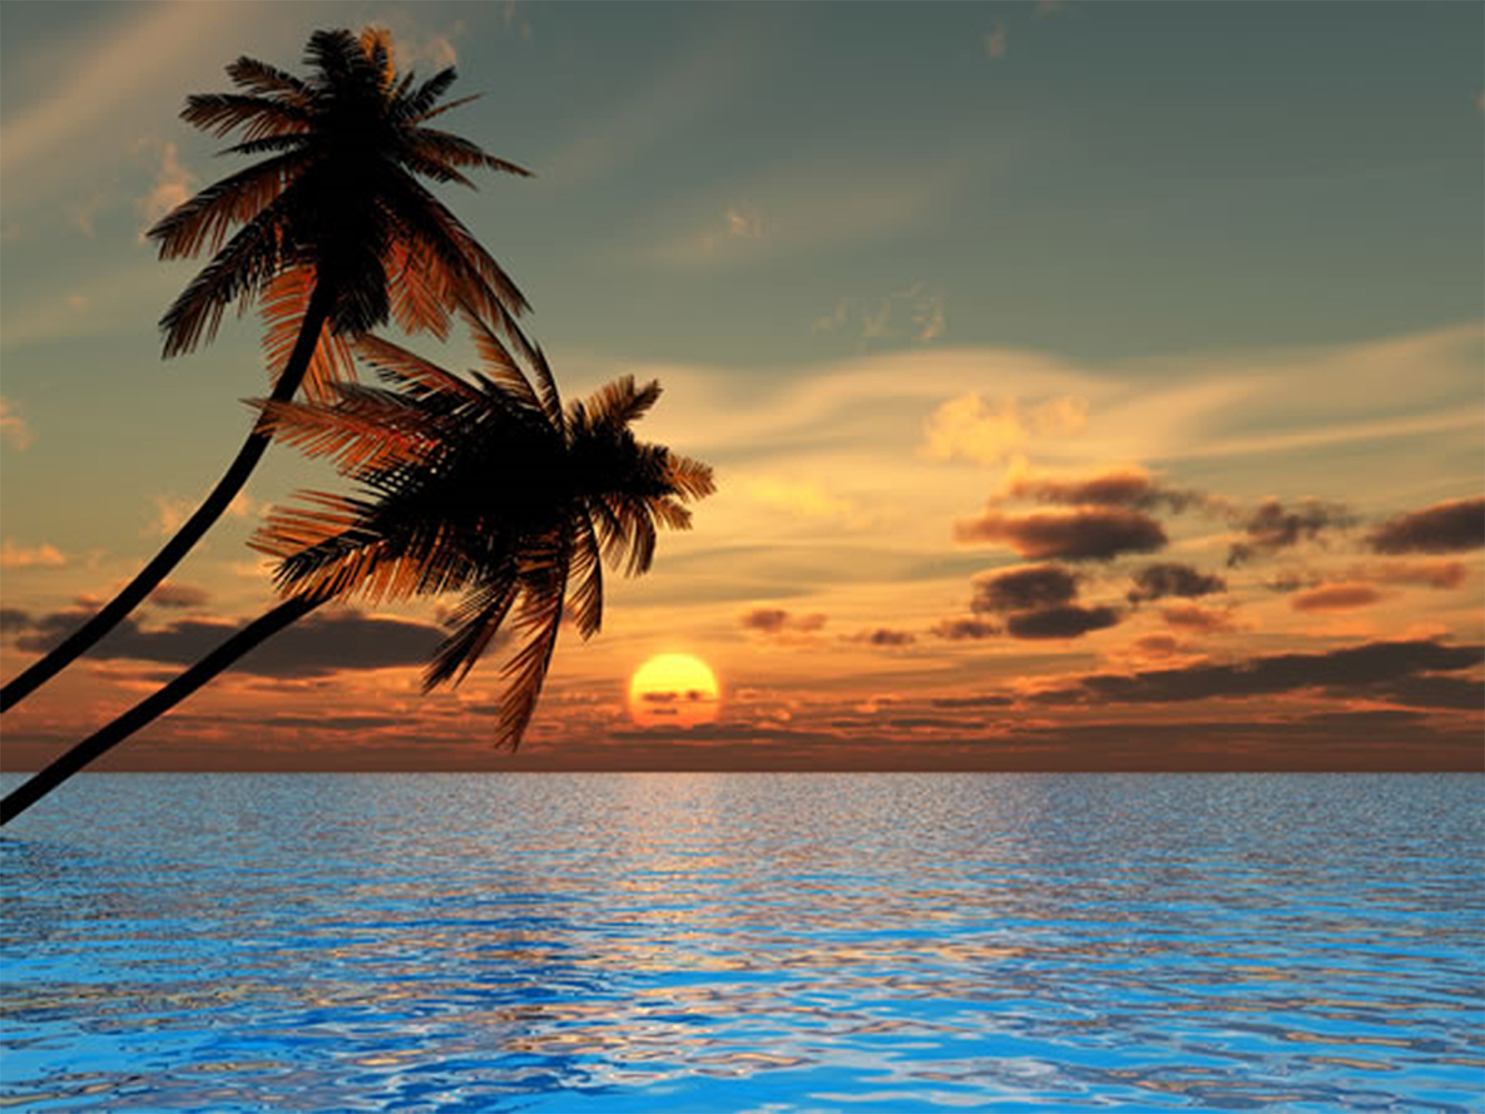  with other wallpapers of sunset beach wallpapers as often as possible